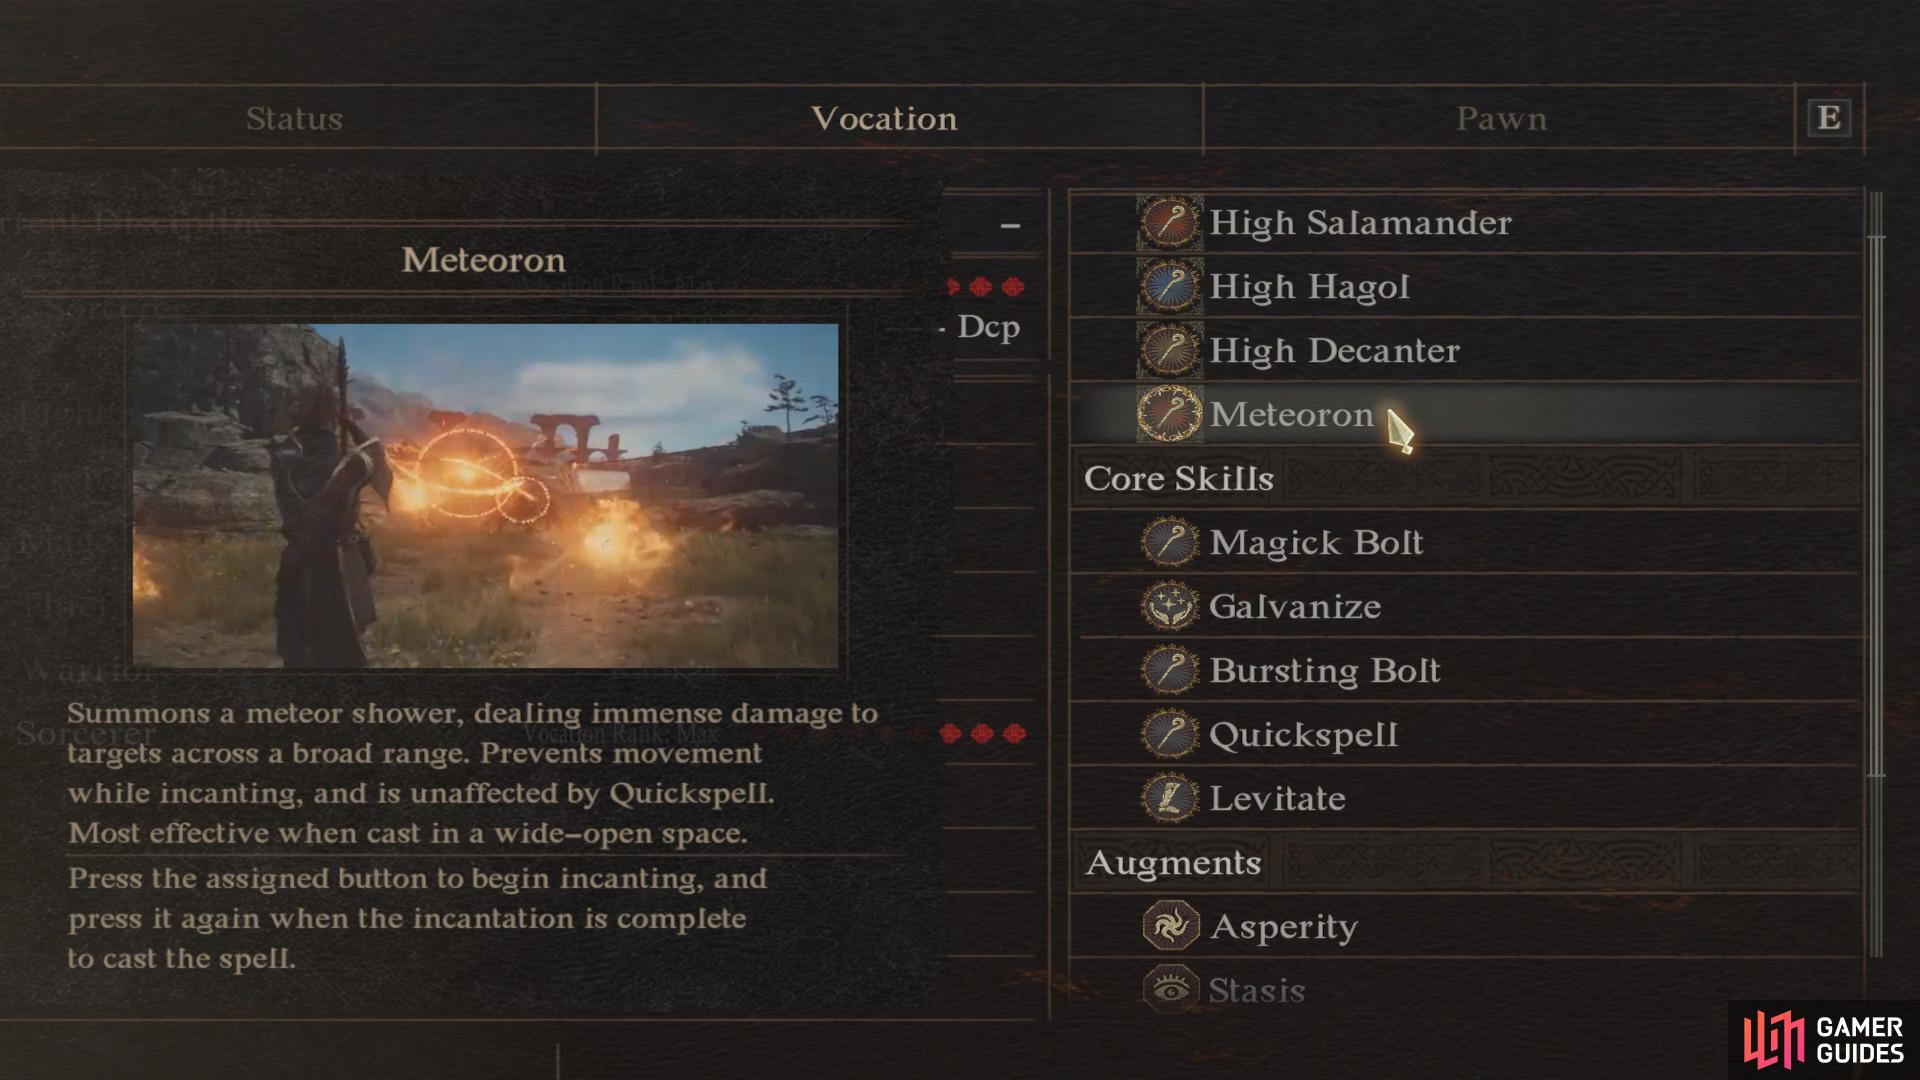 Meteoron is the special unlock sorc skill that drops incredibly powerful meteors from the sky, devasting every fight.